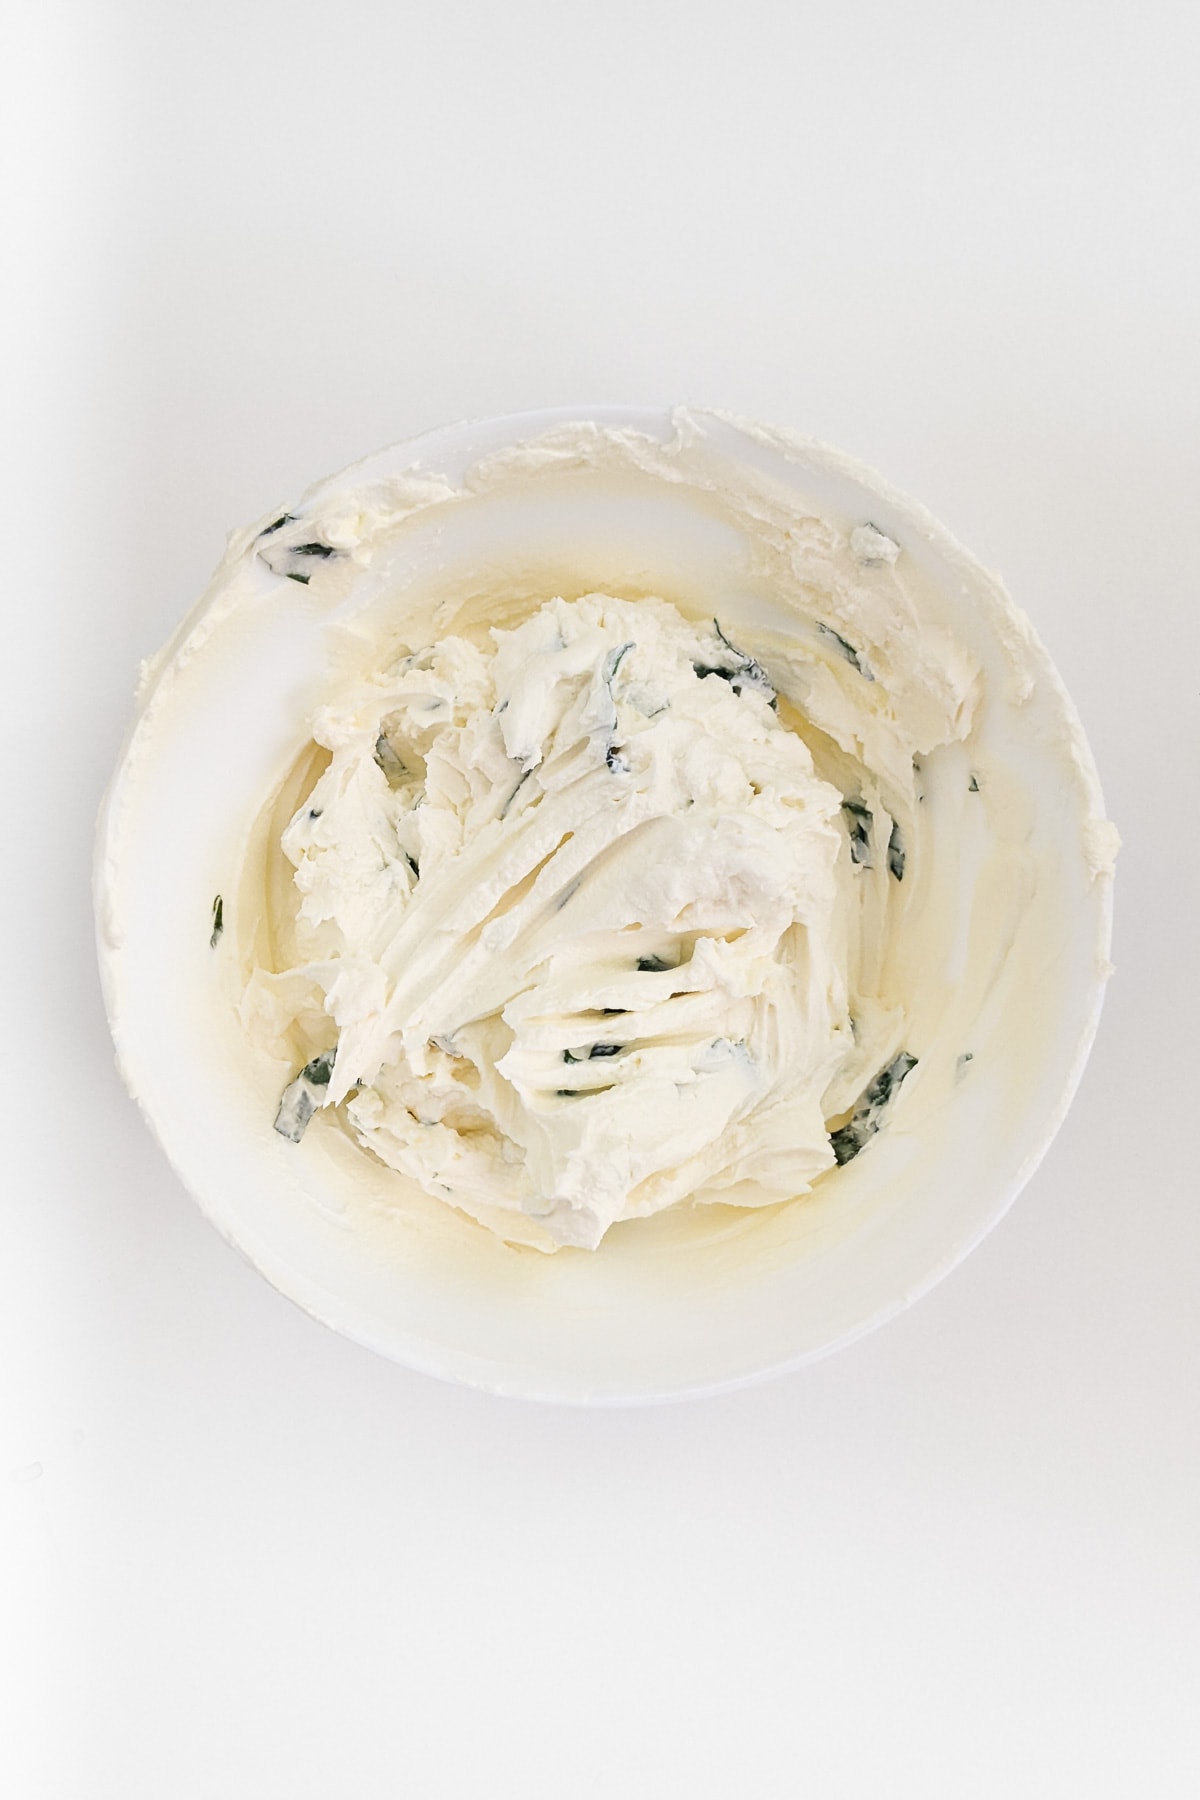 White plate with cream cheese and basil leaves.